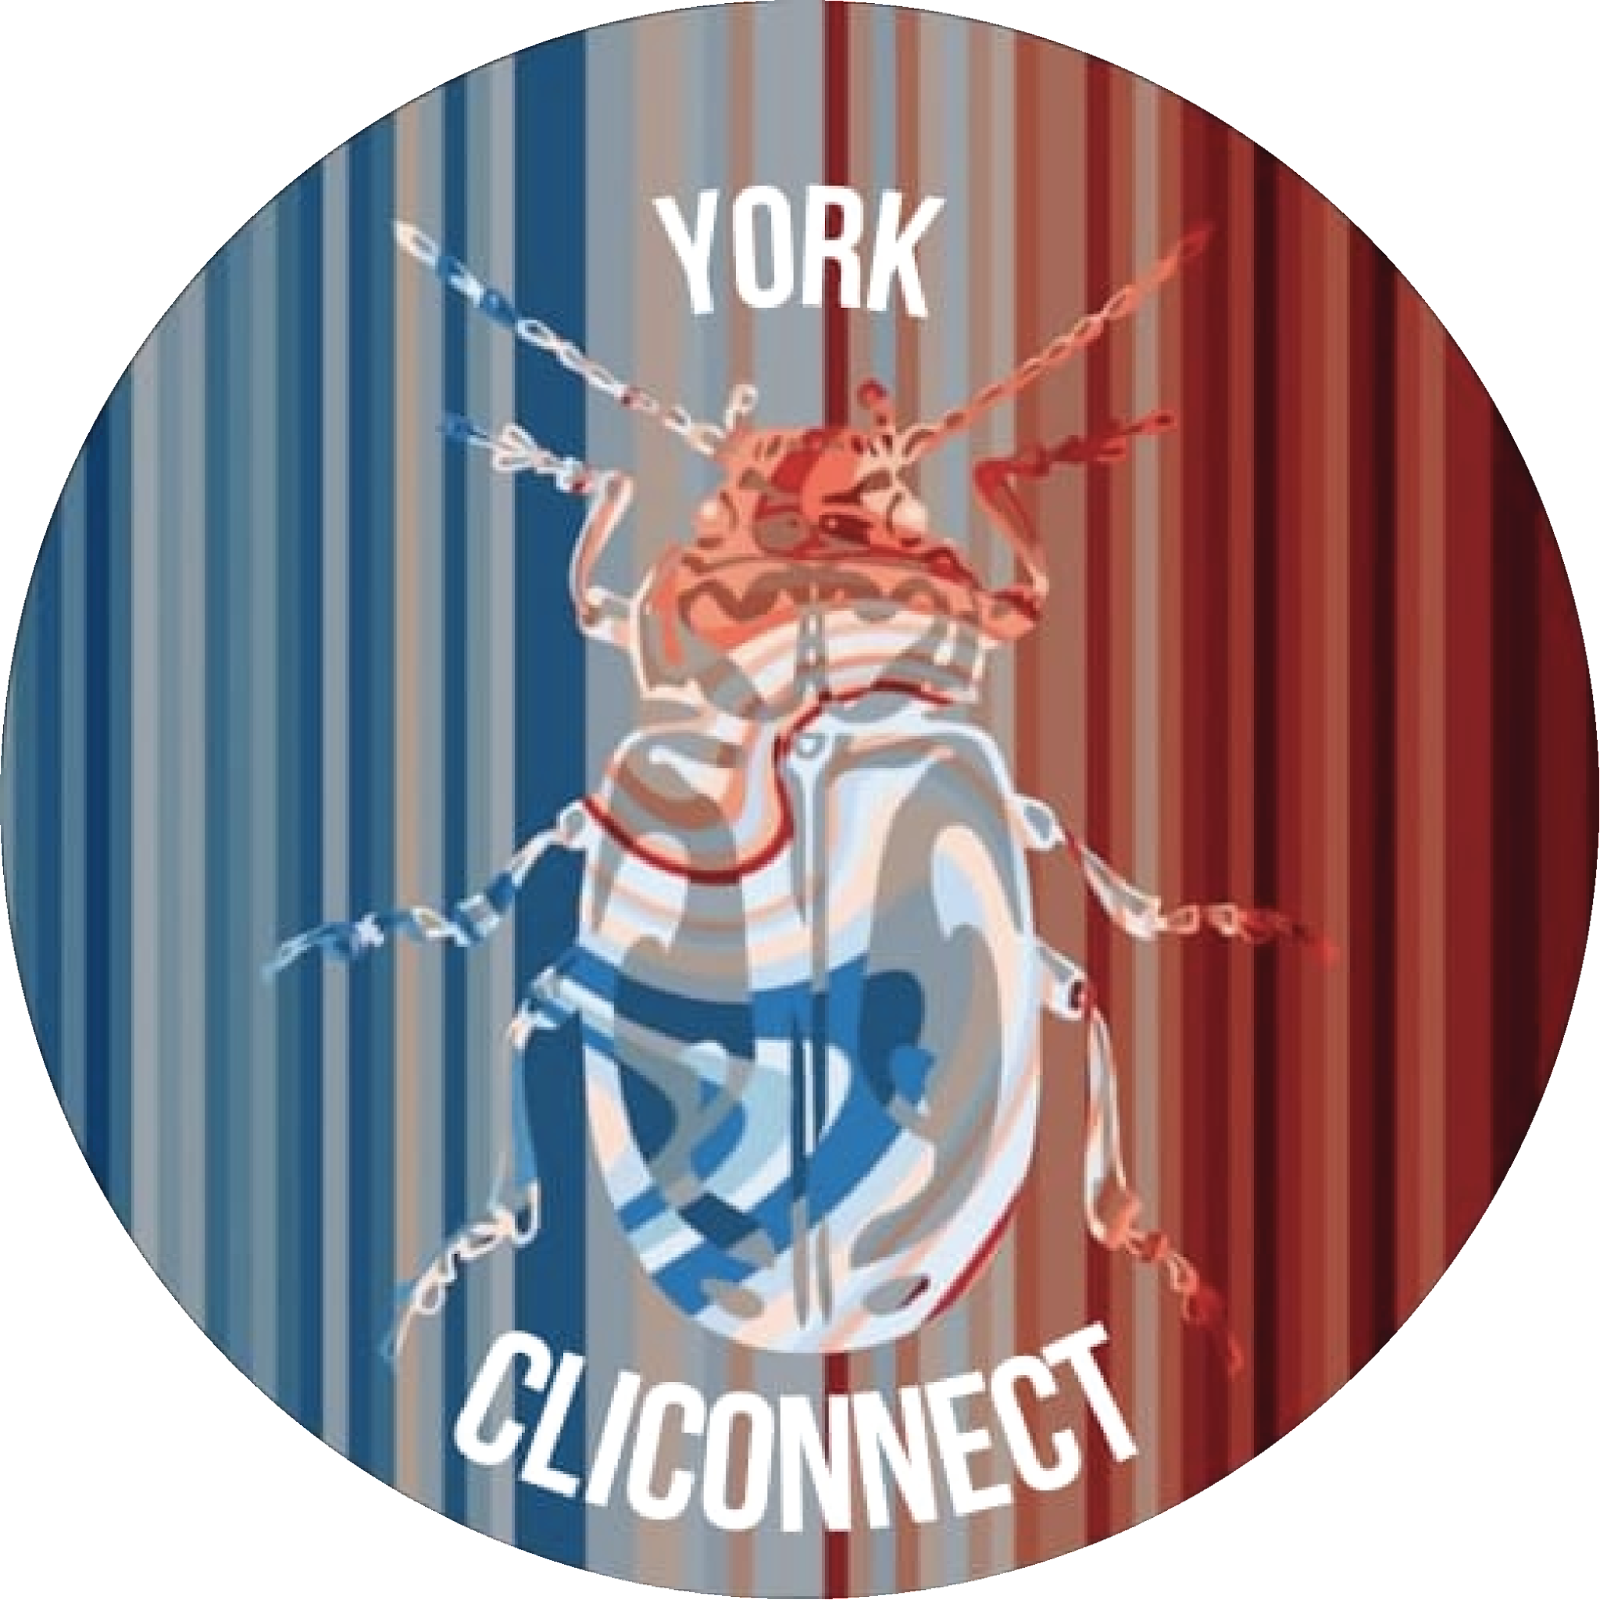 YorkCliConnect's logo: a drawing of a Tansy beetle on a background of climate warming stripes. The stripes warp around the shell of the beetle, alluding to the interactions between the climate and nature crises